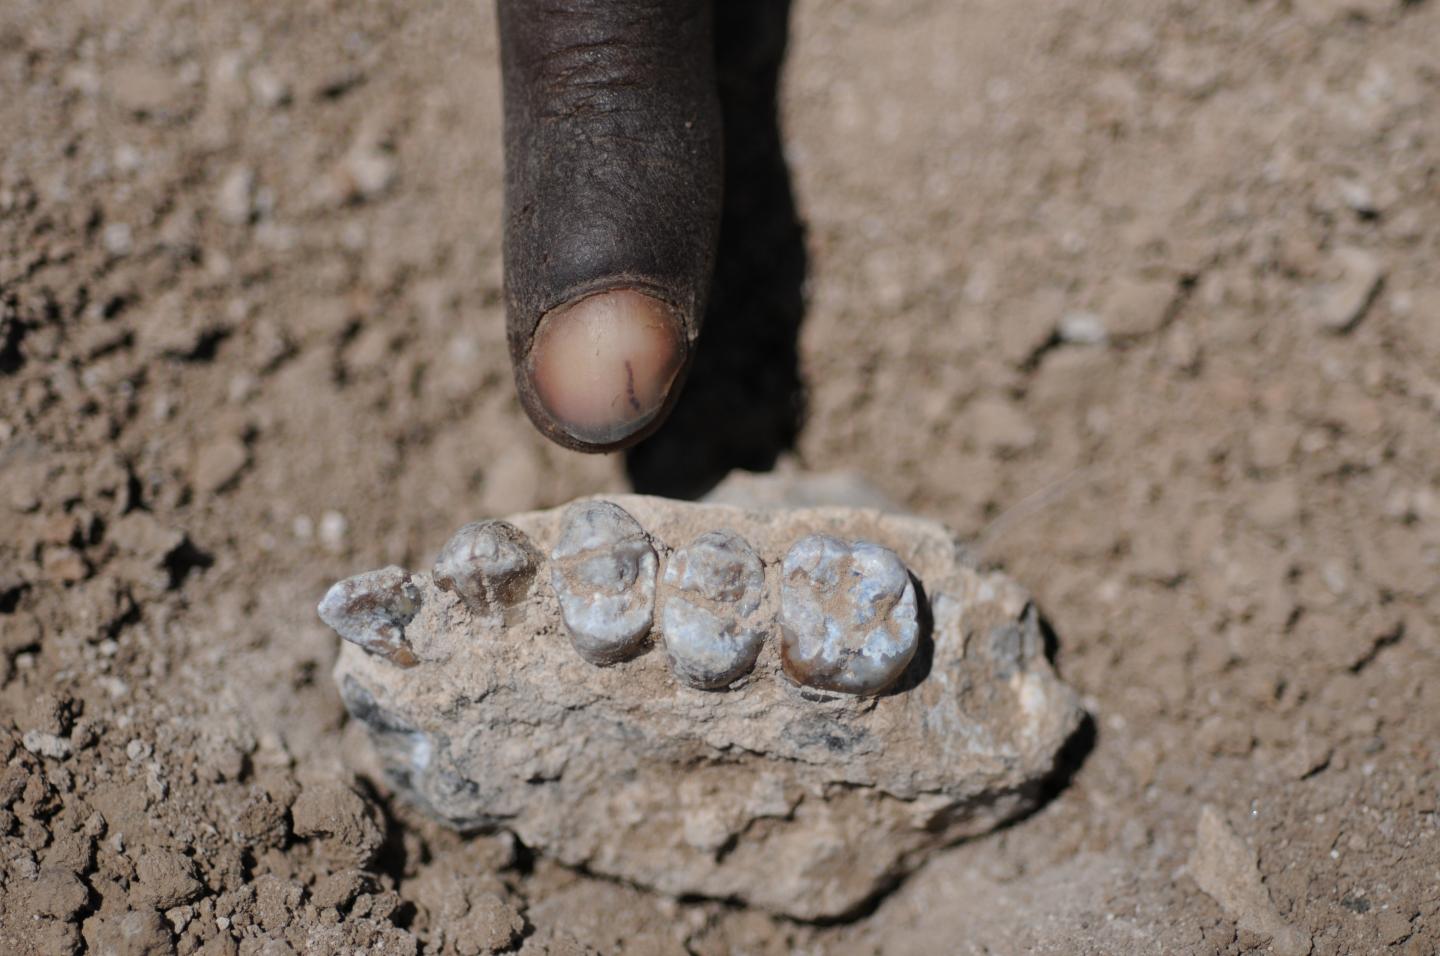 Upper Jaw Fossil of a New Human Ancestor Species from Ethiopia